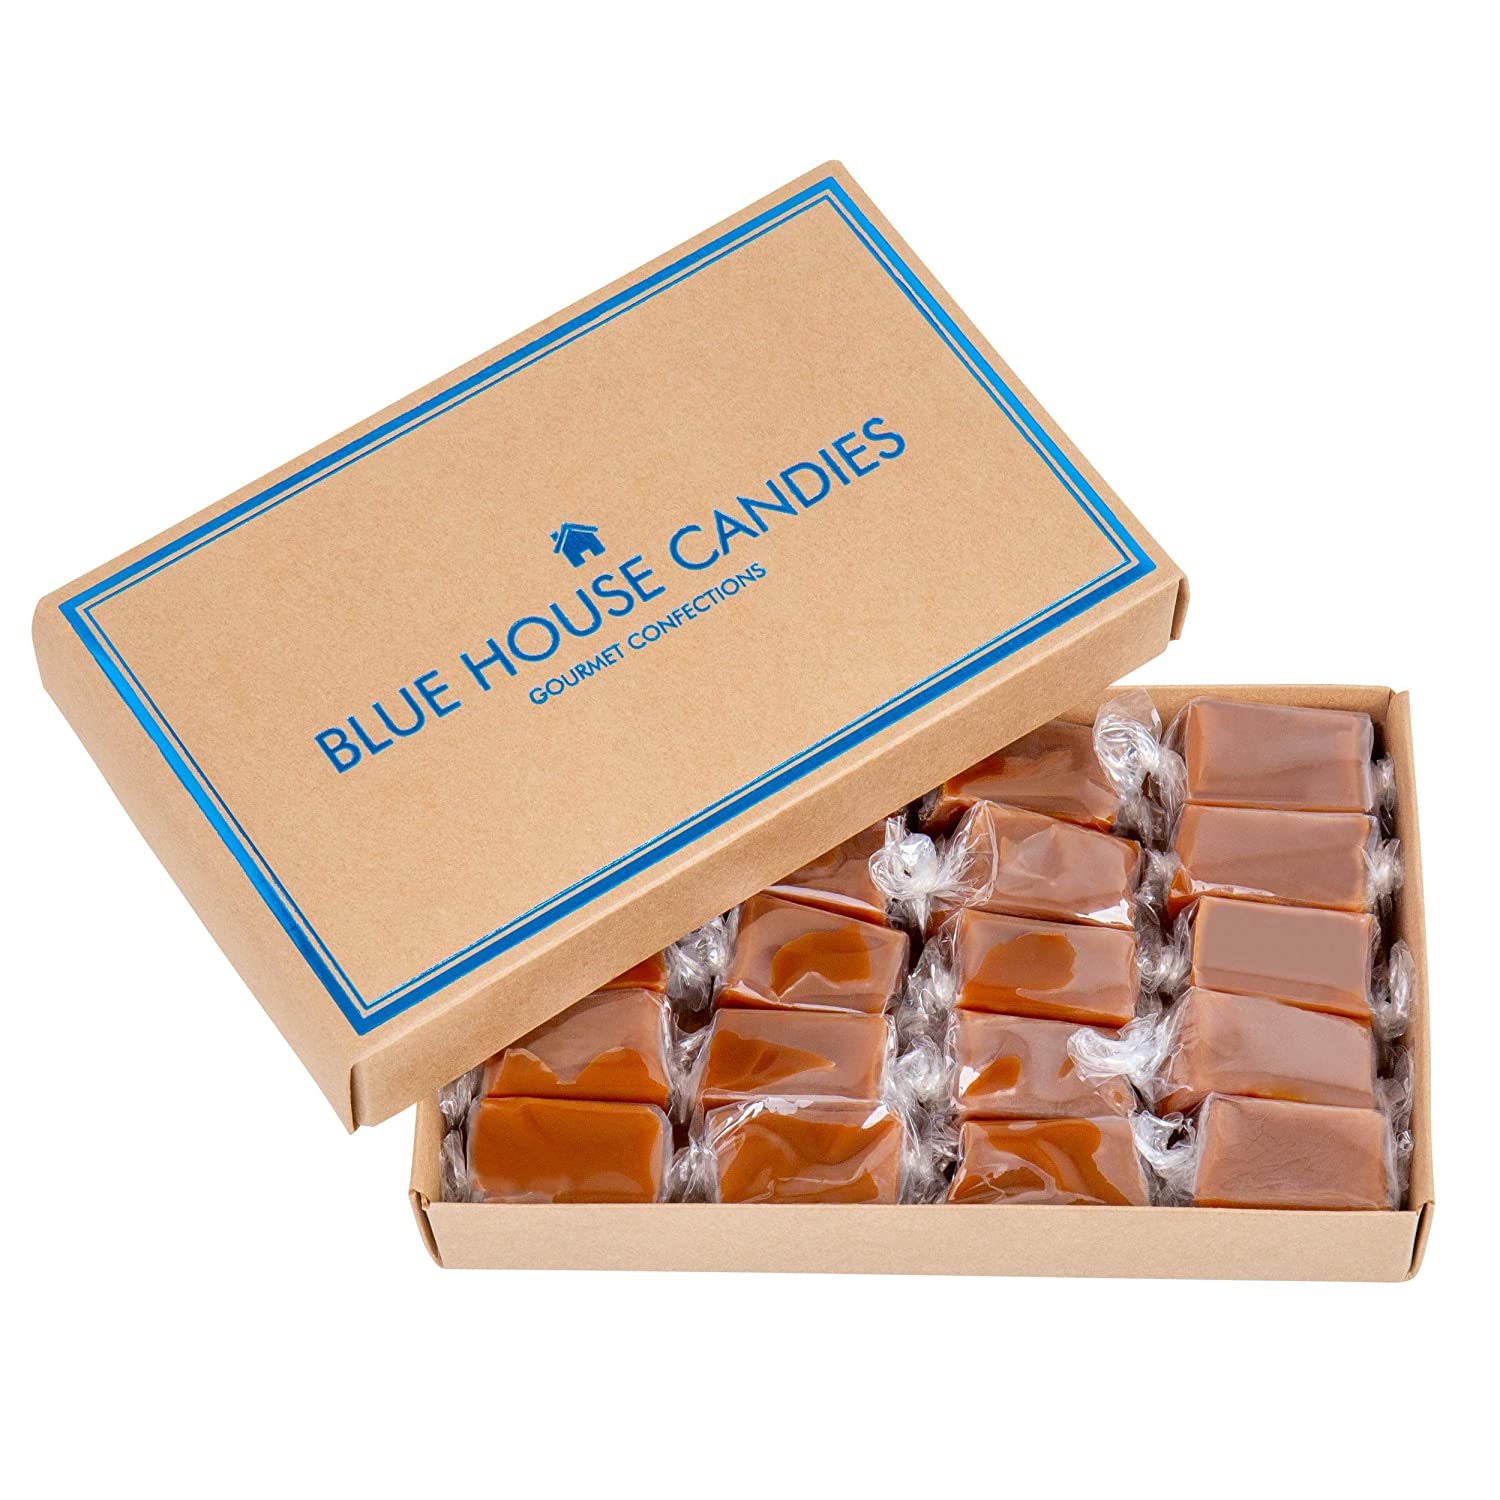 Blue House Gourmet Boxed Caramels